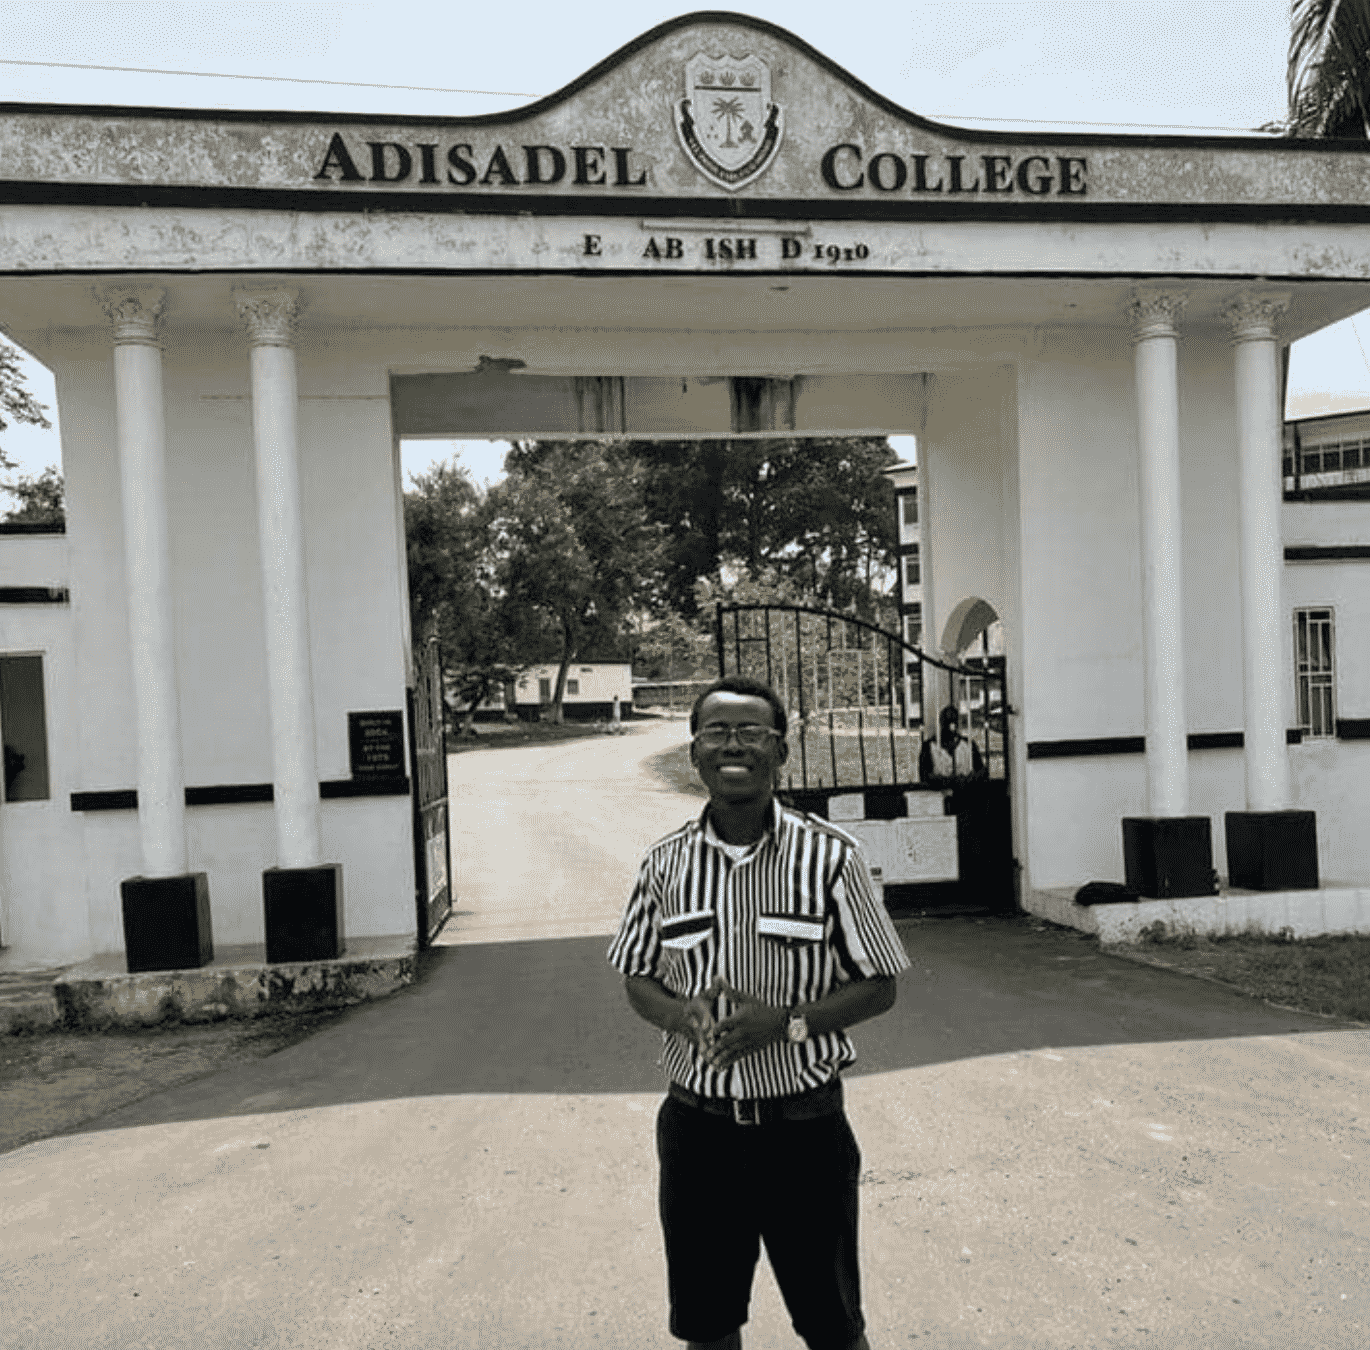 Meet Richard Oponin Marfo; the 32-year-old who enters Adisadel College after 5 failed attempts 